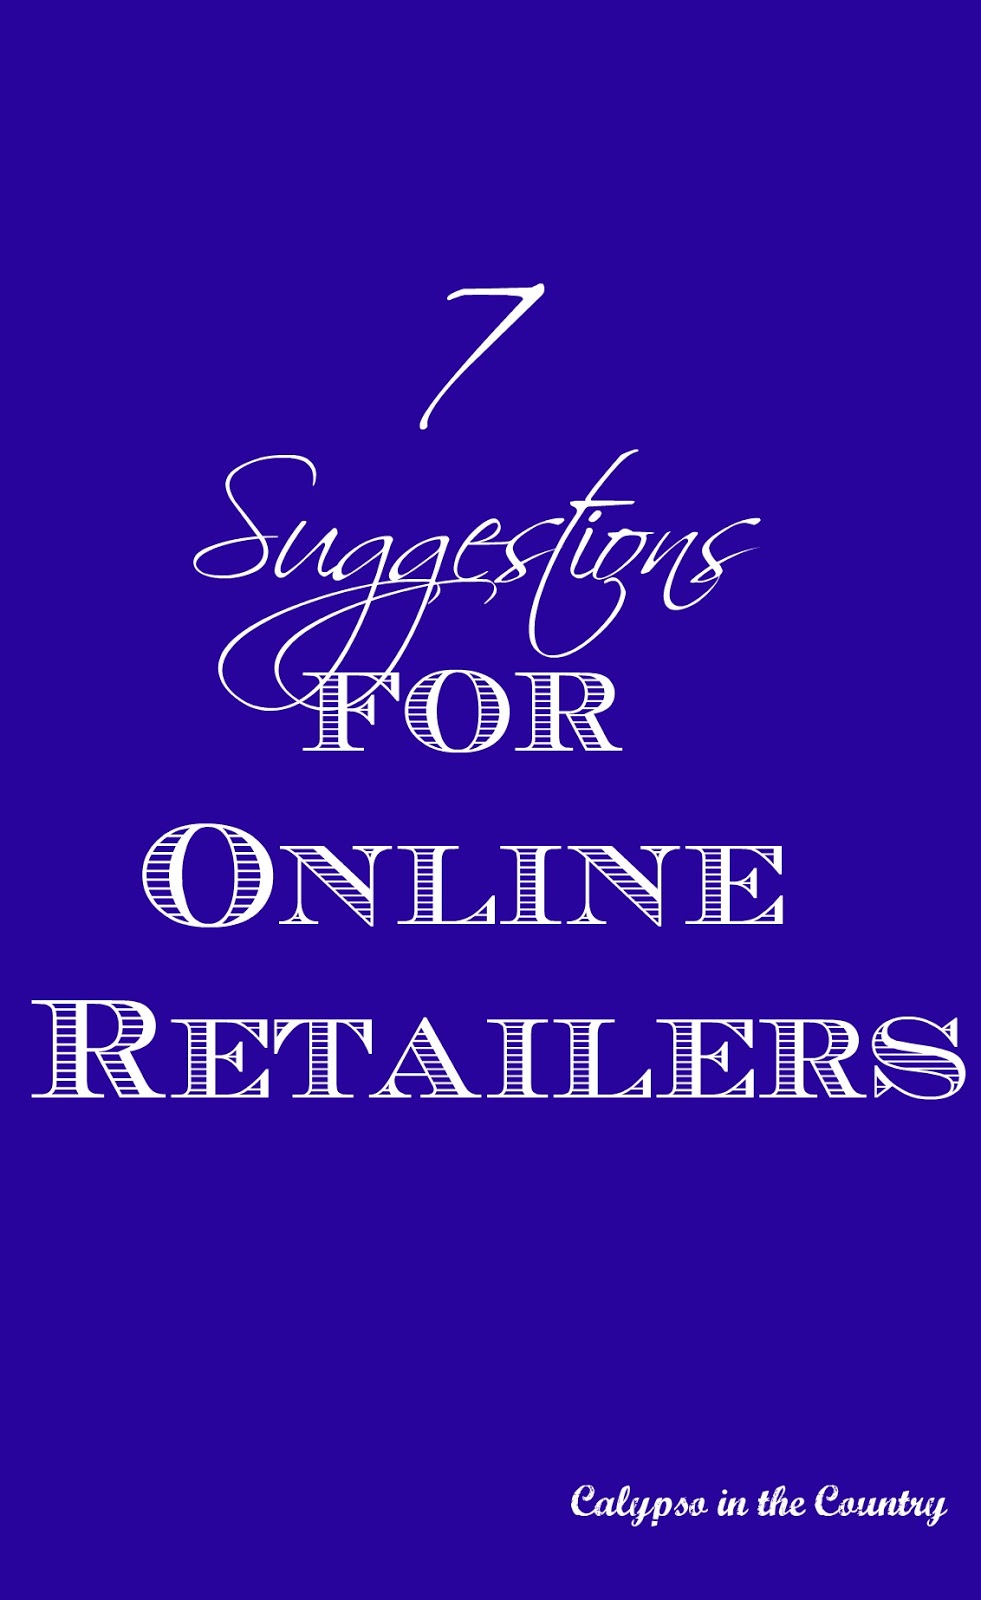 Seven Suggestions for Online Retailers - Calypso in the Country Blog